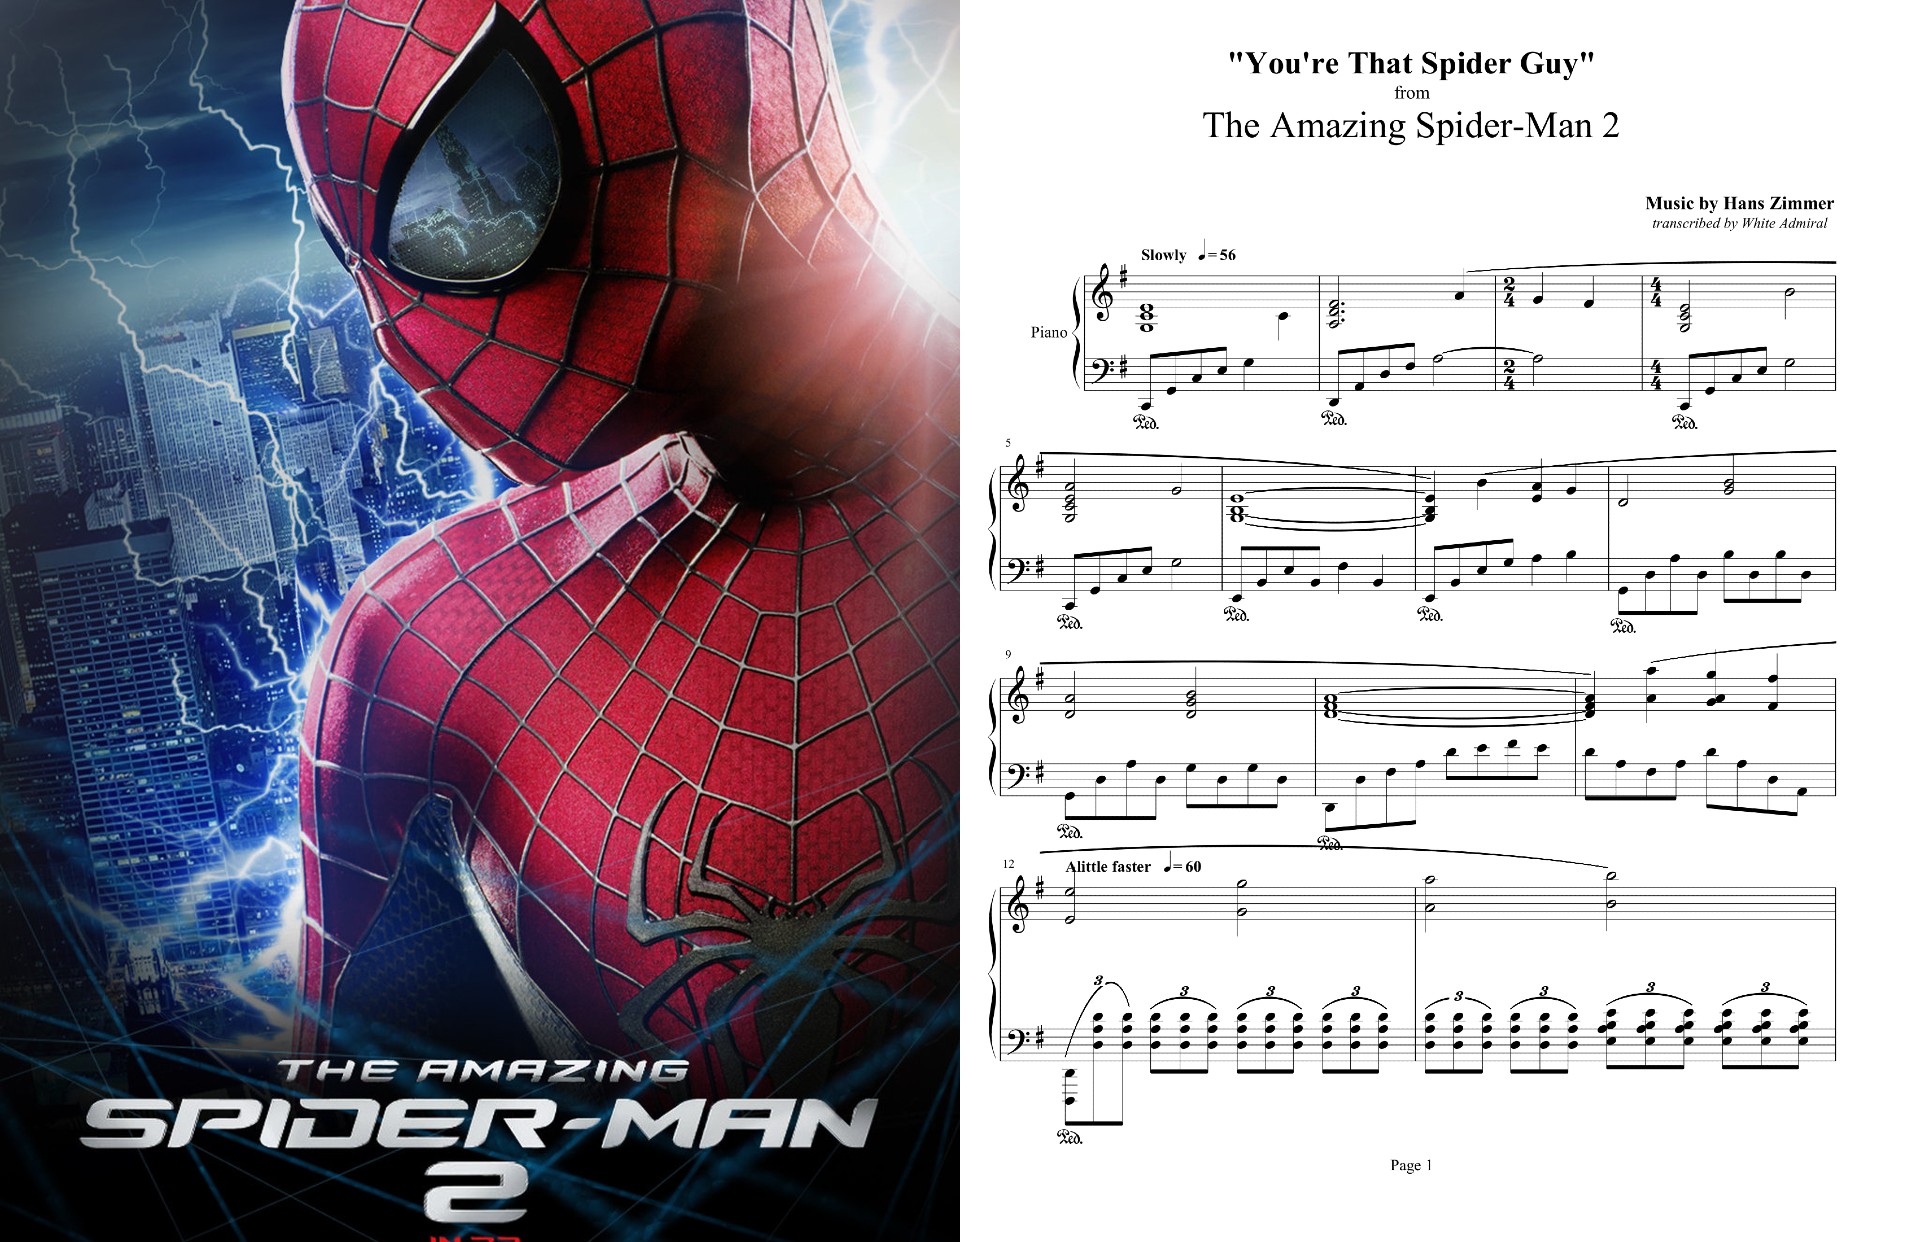 The Amazing Spider-Man 2 (You're That Spider Guy).jpg